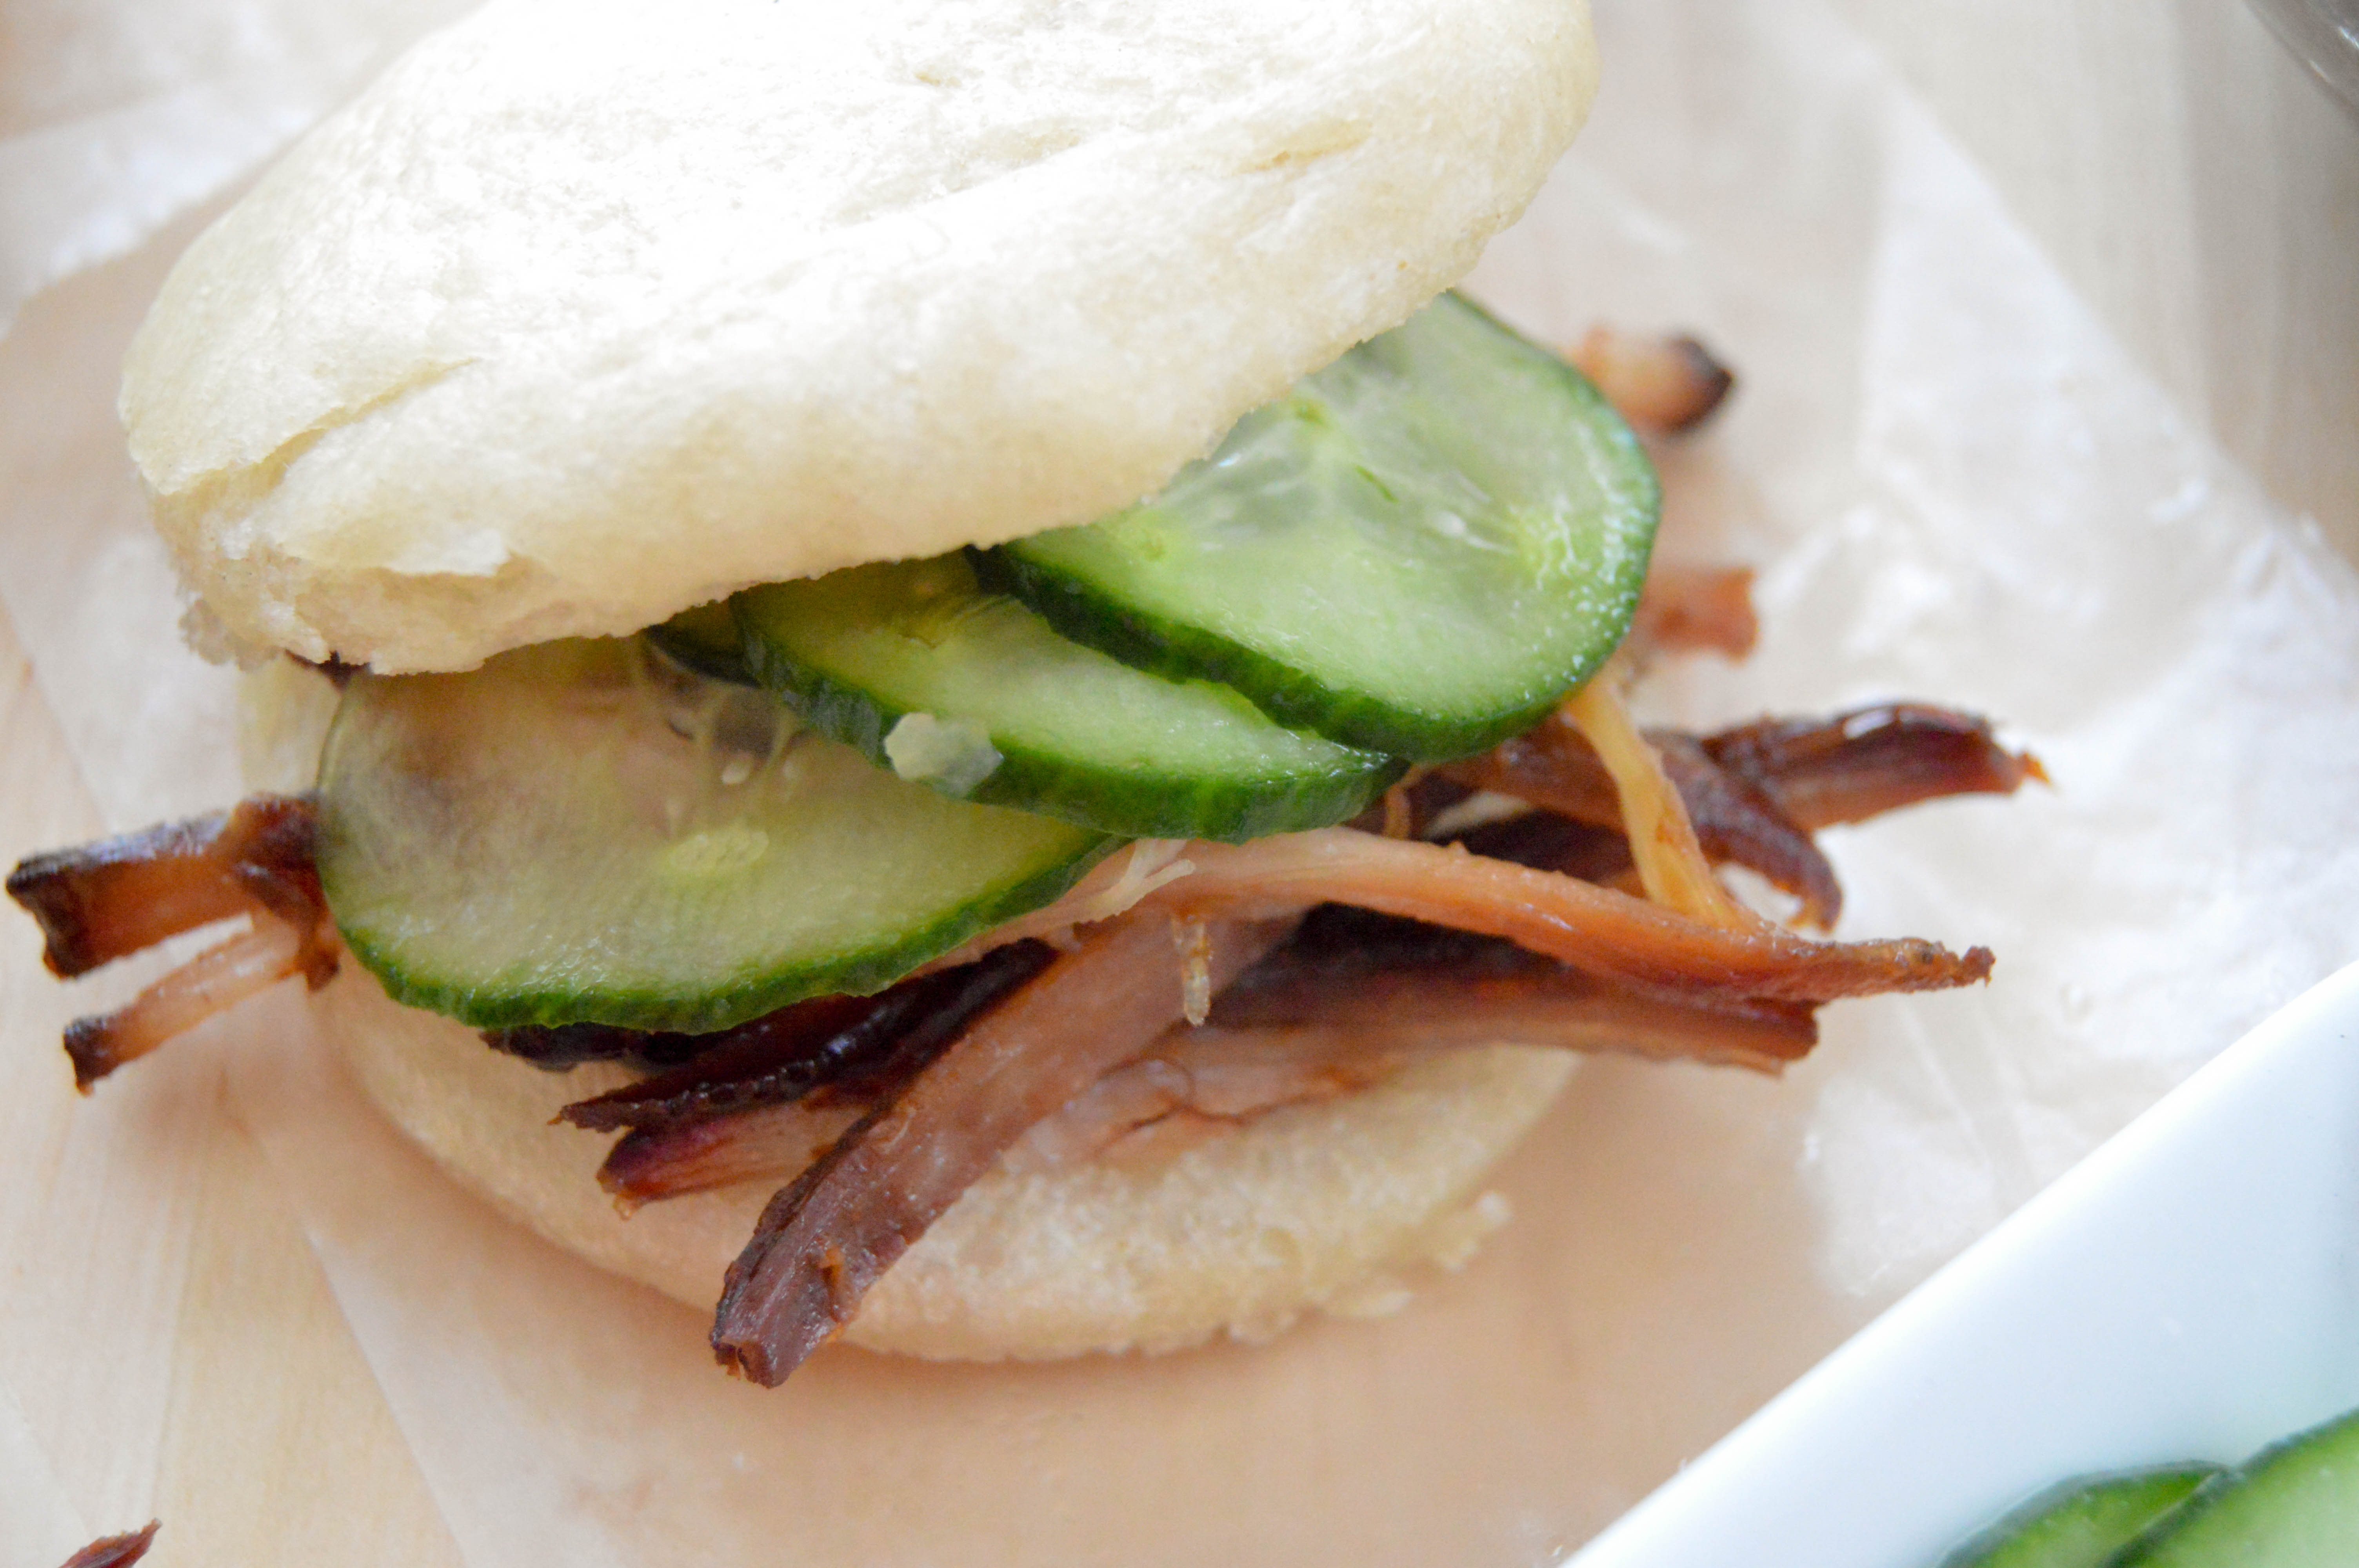 Bao buns or Chinese steamed buns